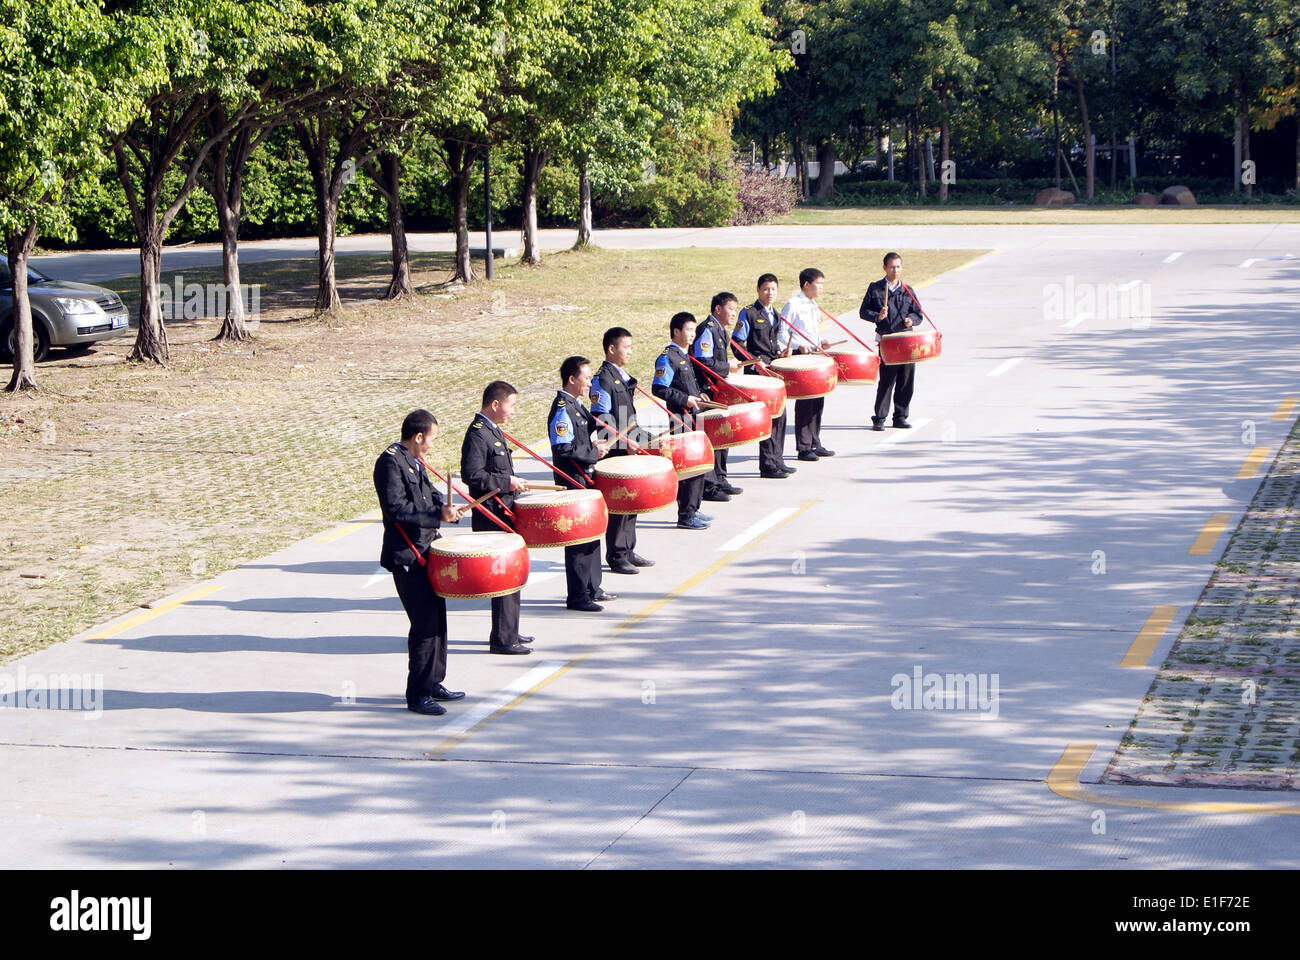 The Chinese community security guard the drums in practice Stock Photo